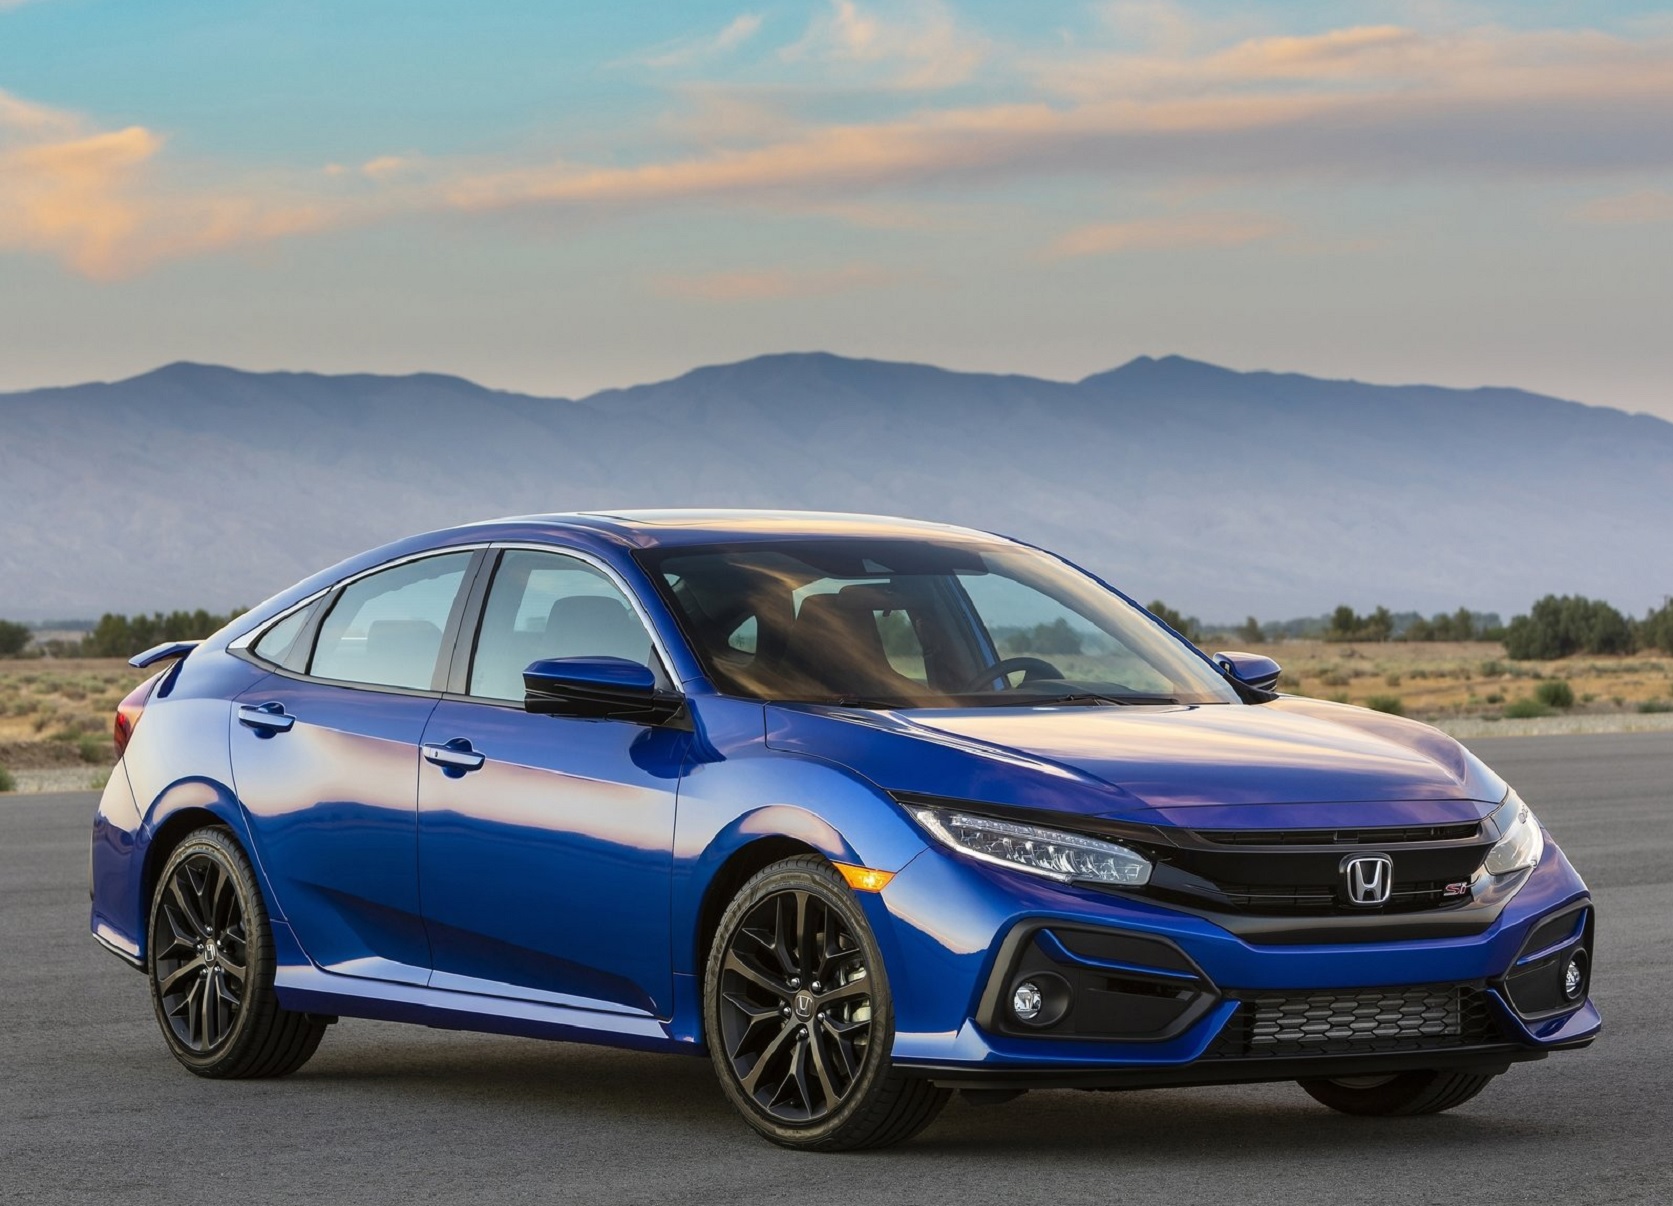 Unveiling of the 2022 Honda Civic Shows It's Still Running